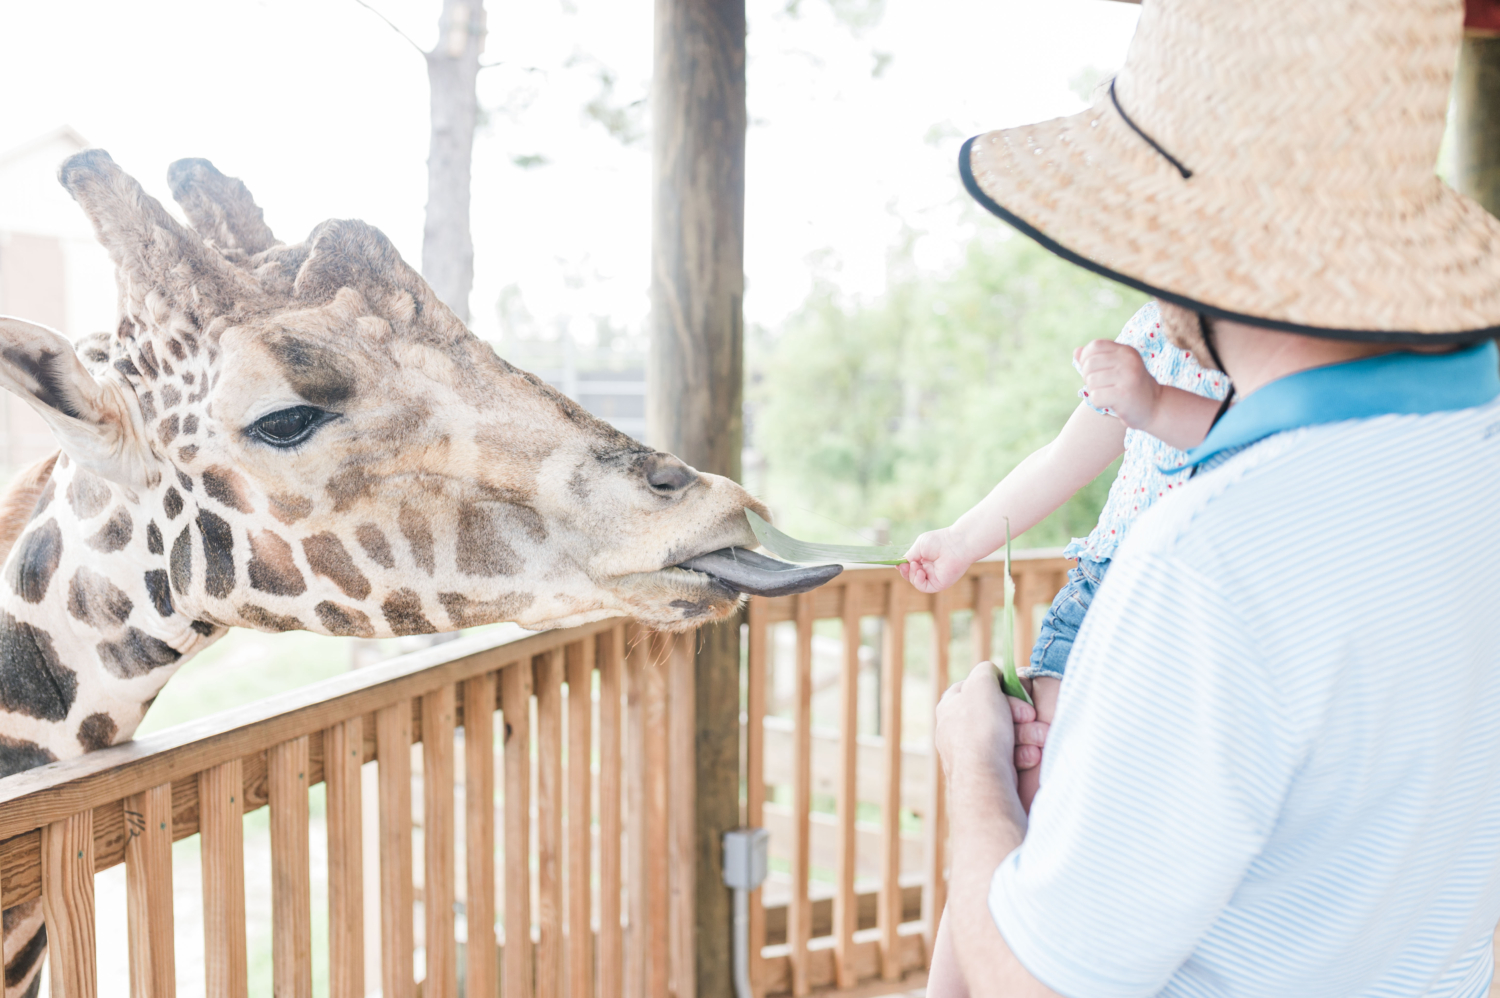 John Naylor holding daughter who is holding out a leaf for a giraffe to eat at the Alabama Gulf Coast Zoo. Gulf Shores Activities.